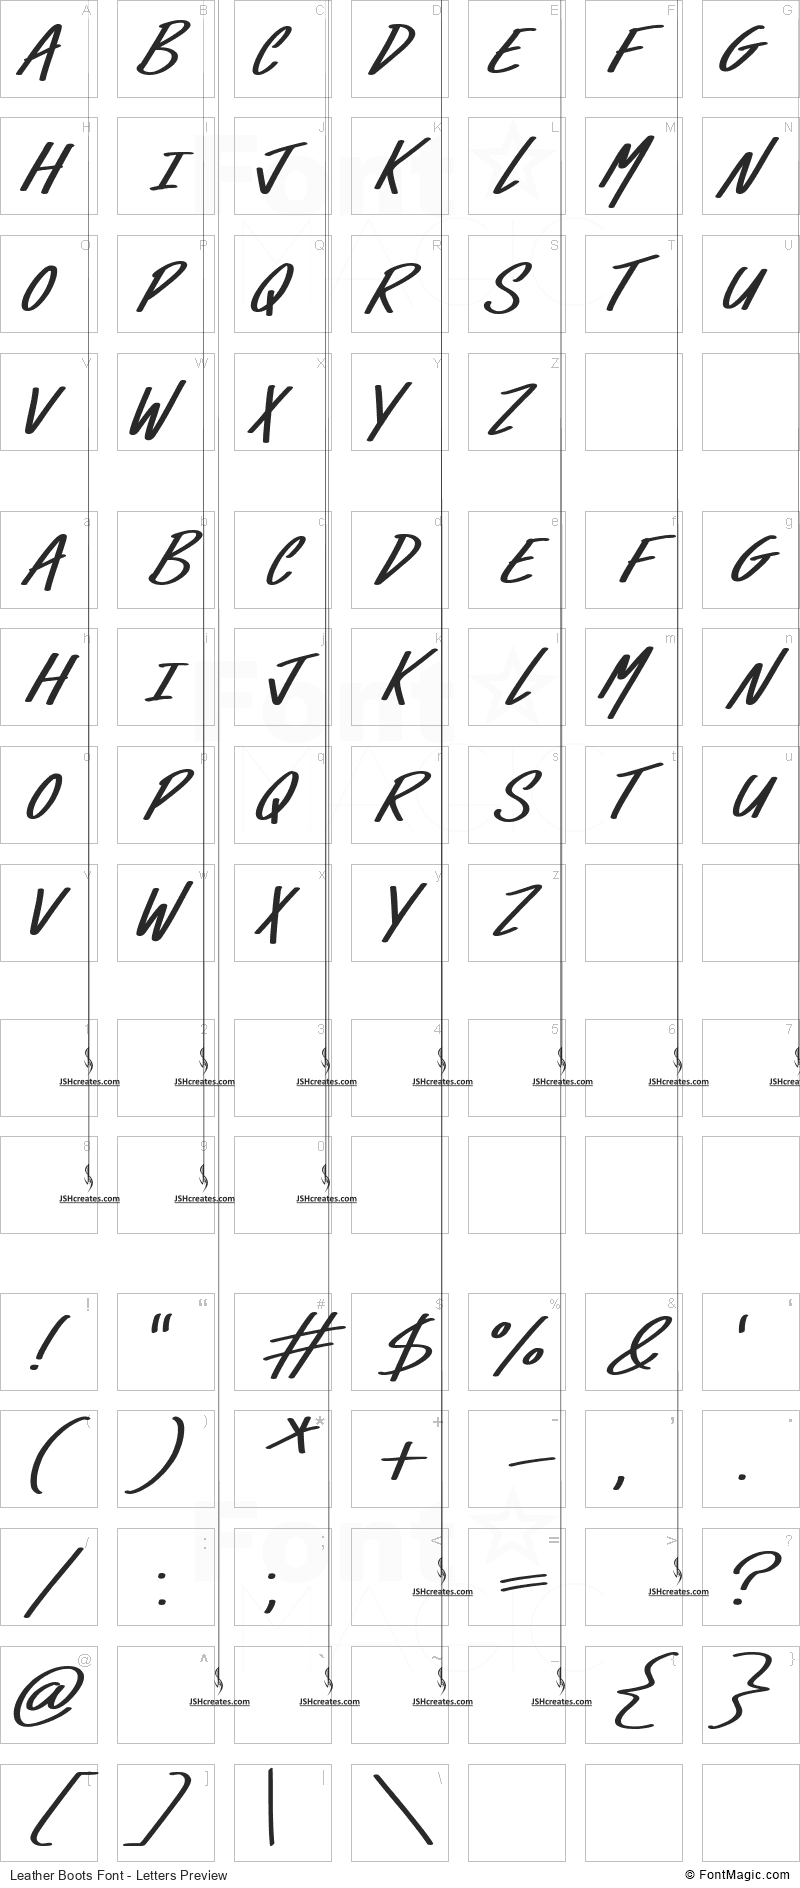 Leather Boots Font - All Latters Preview Chart